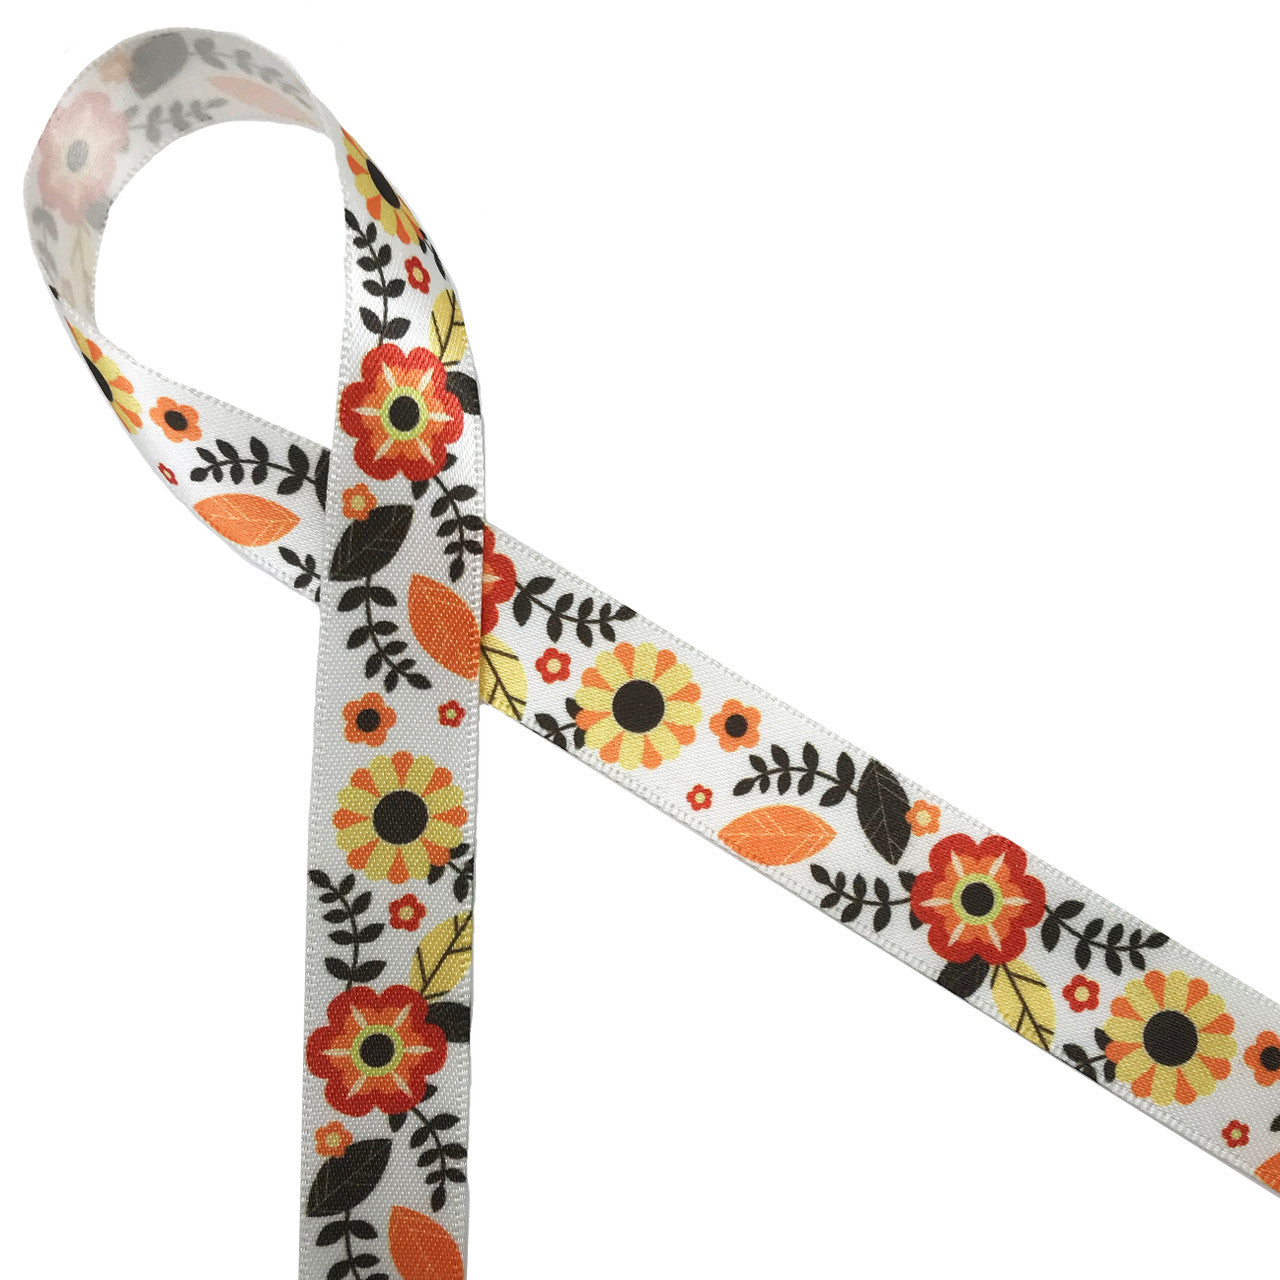 Fall Floral ribbon with flowers of red, orange, yellow and brown leaves  printed on 5/8 antique white double face satin, 10 yards